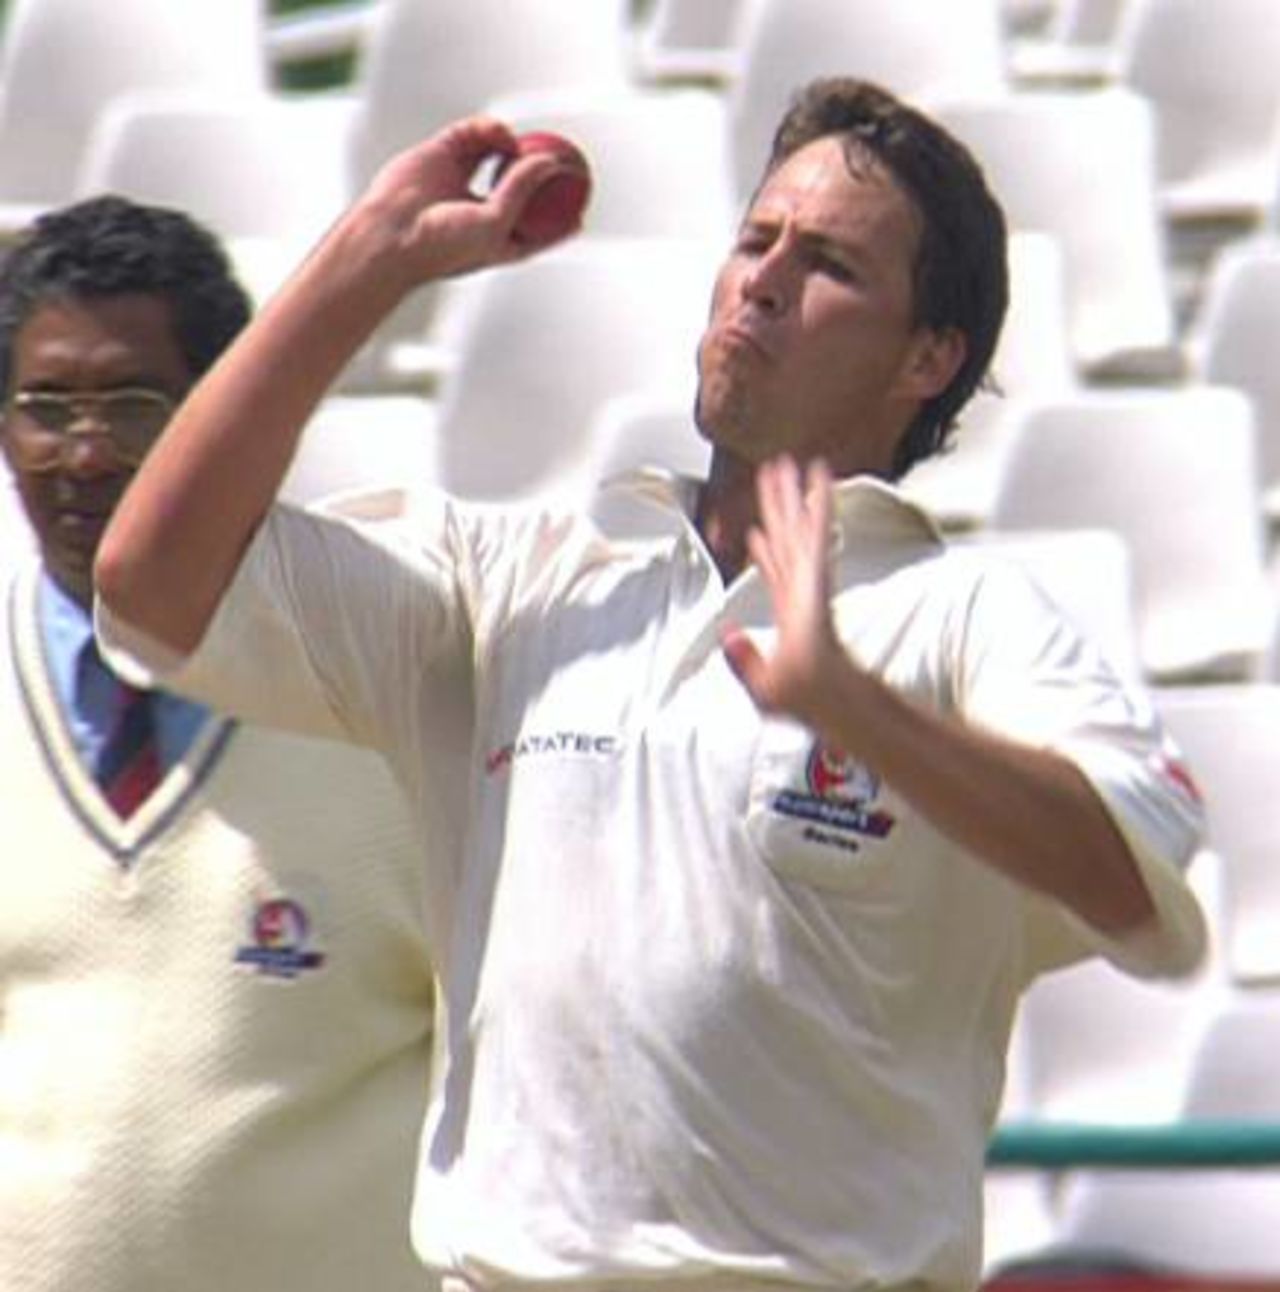 Gauteng's Stefan Jacobs bowls, during the SuperSport Series match against Western Province at Newlands, 21-24 November 1997